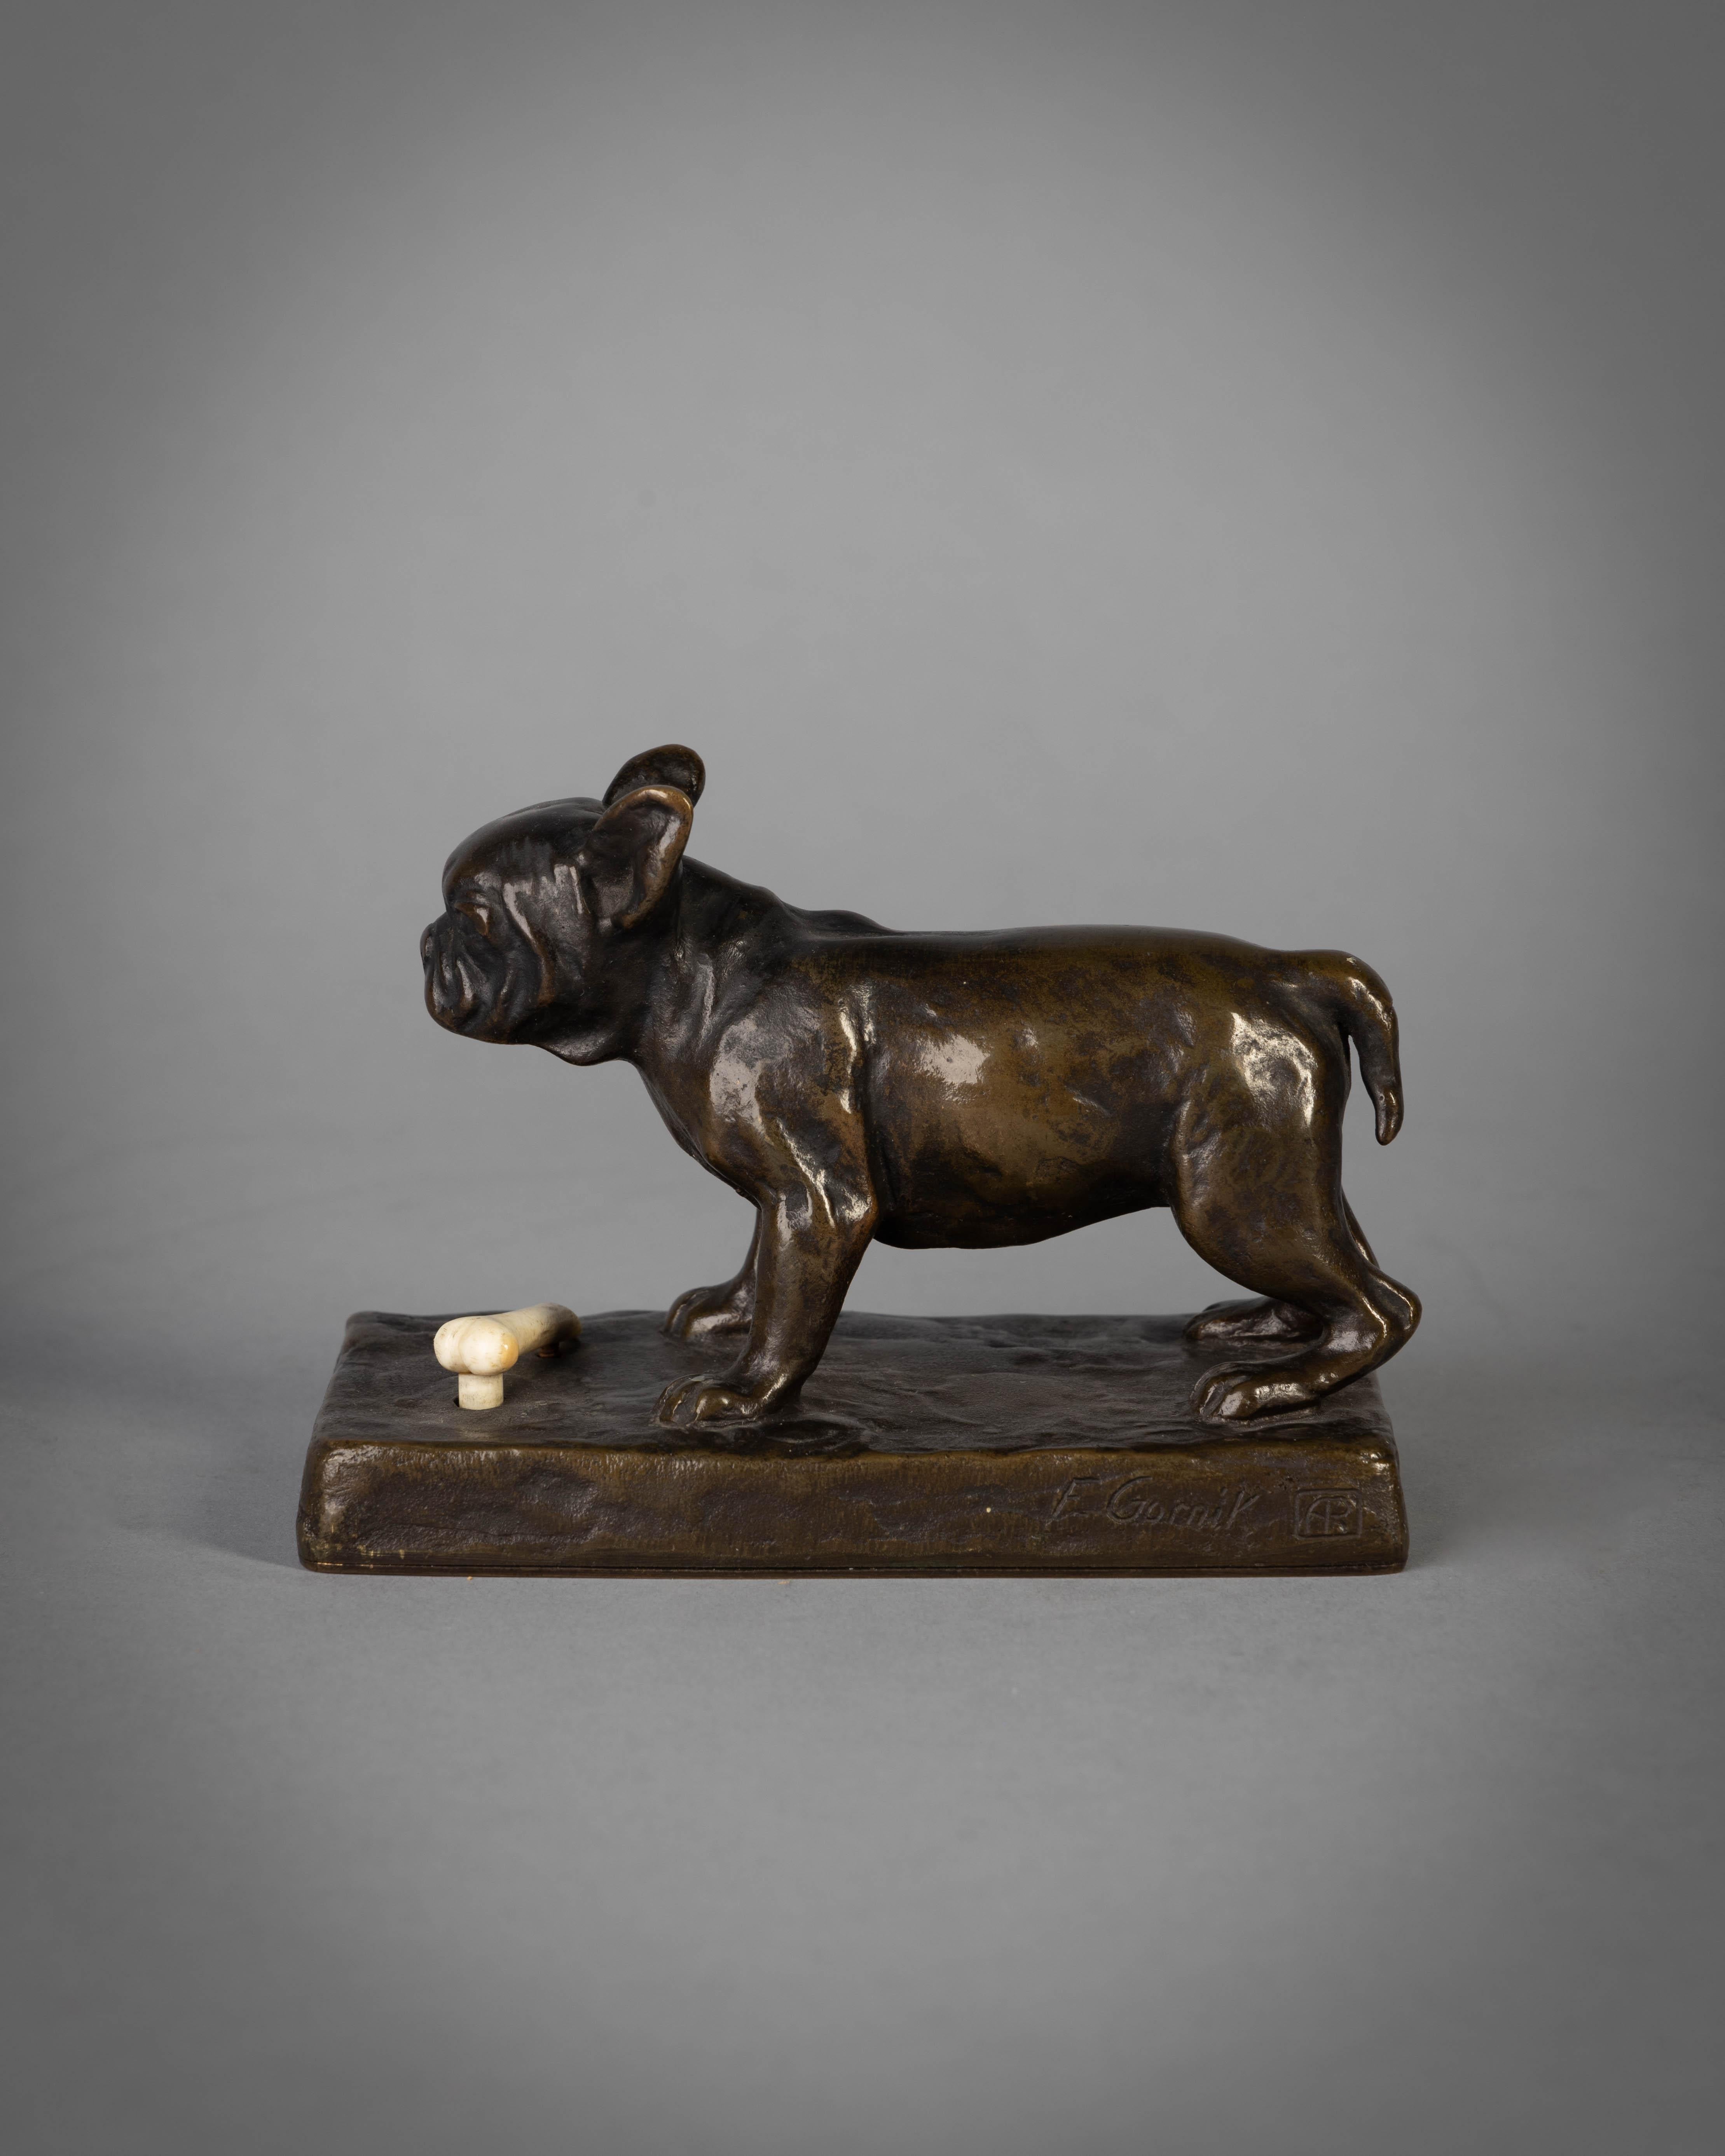 French bulldog signed 'F. Gornick' with Aust-Reich founders mark.

With ivorine bone.